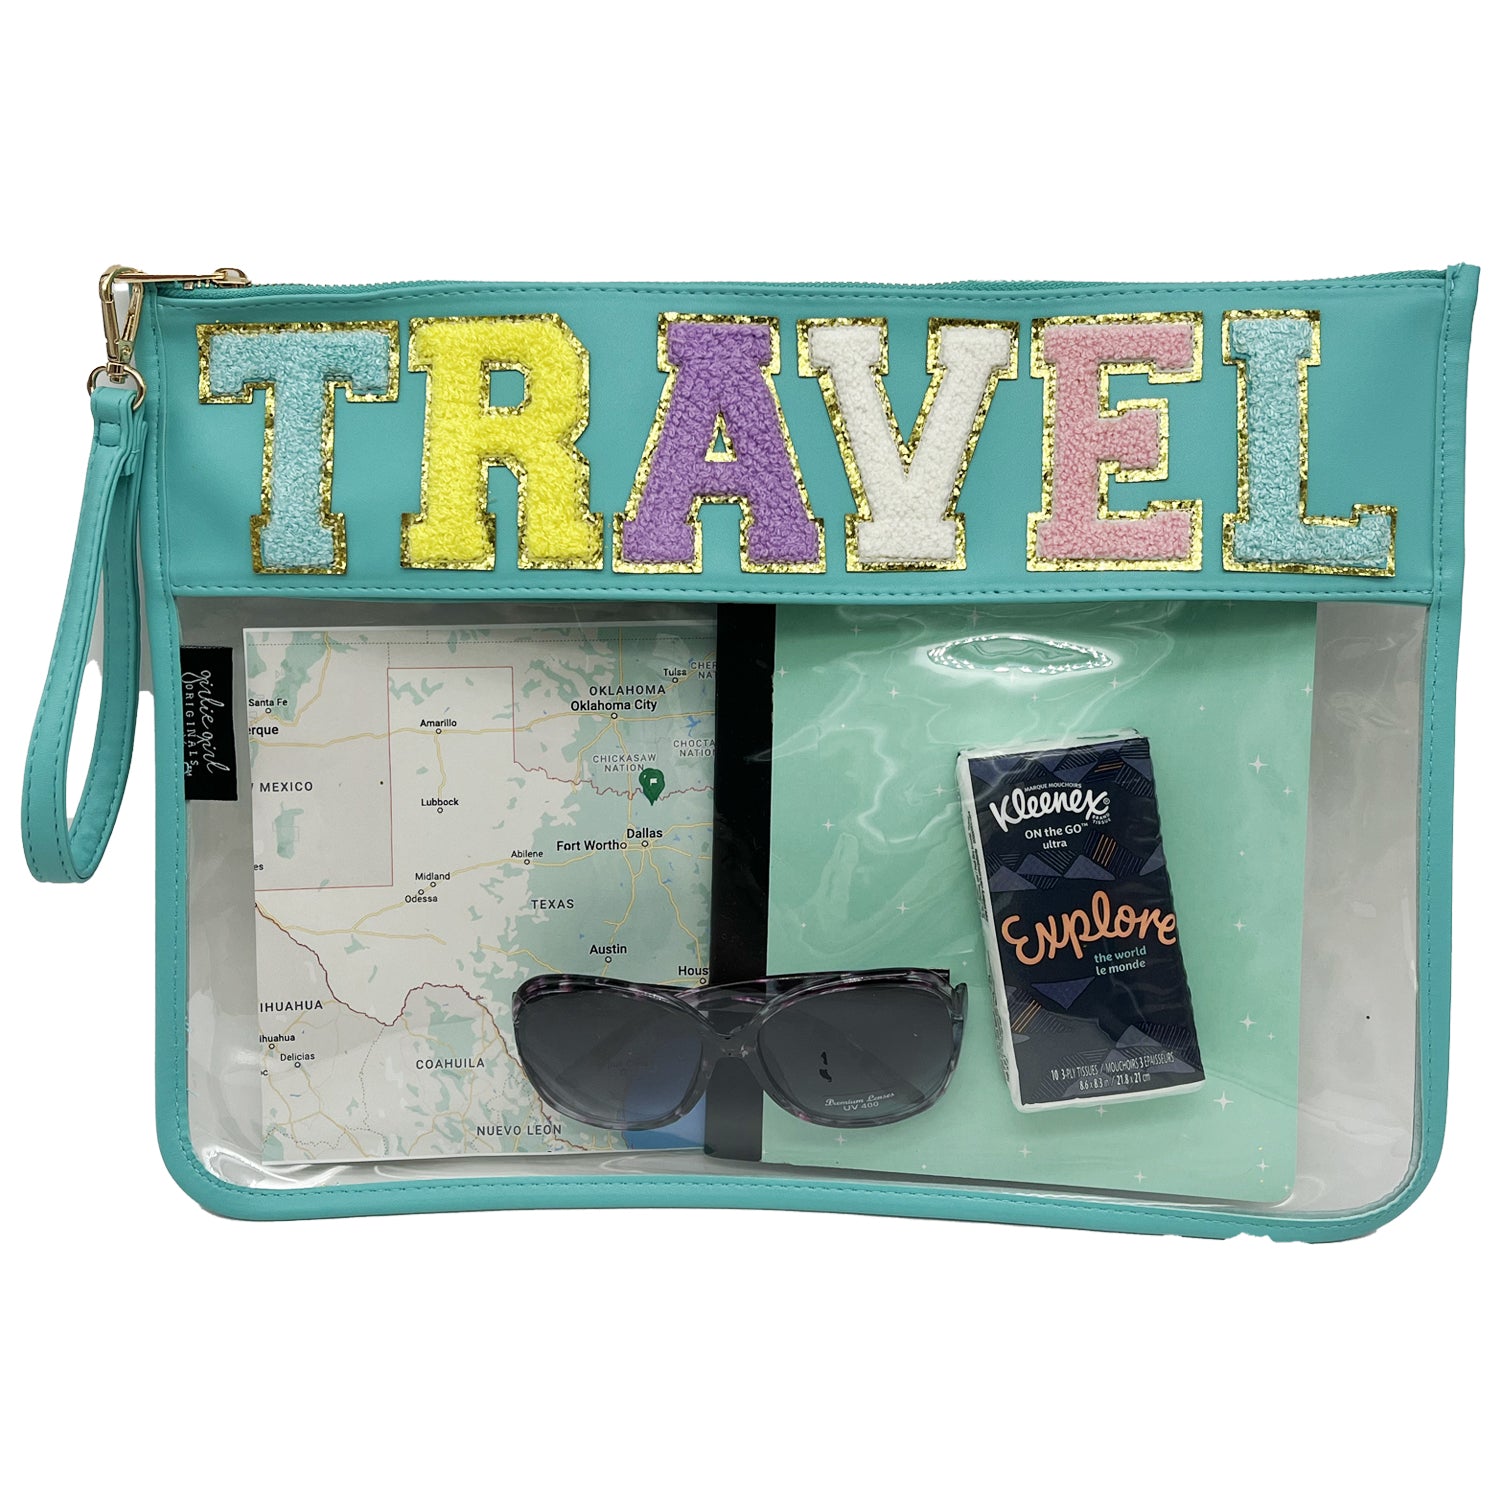 CP-1217 CANDY BAG TRAVEL MINT